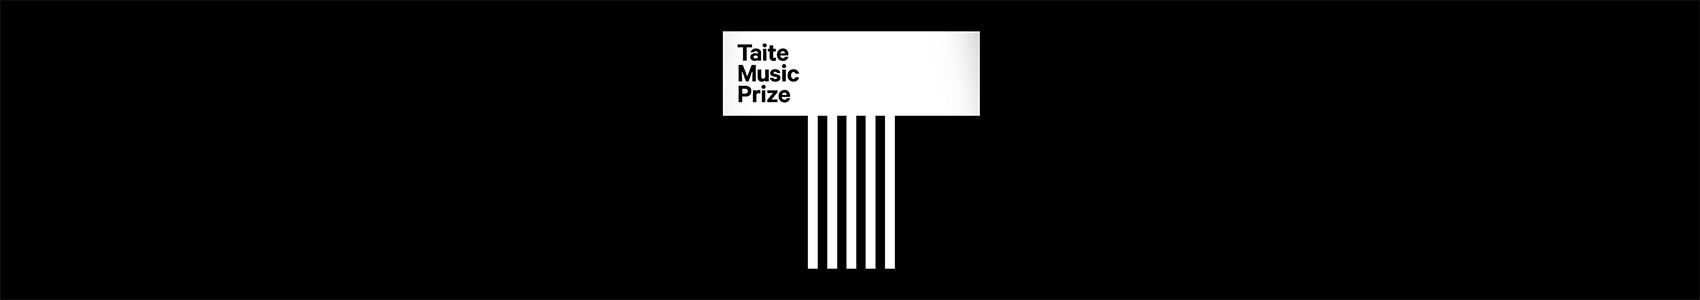 Taite Music Prize: Auckland Live Best Independent Debut Award 